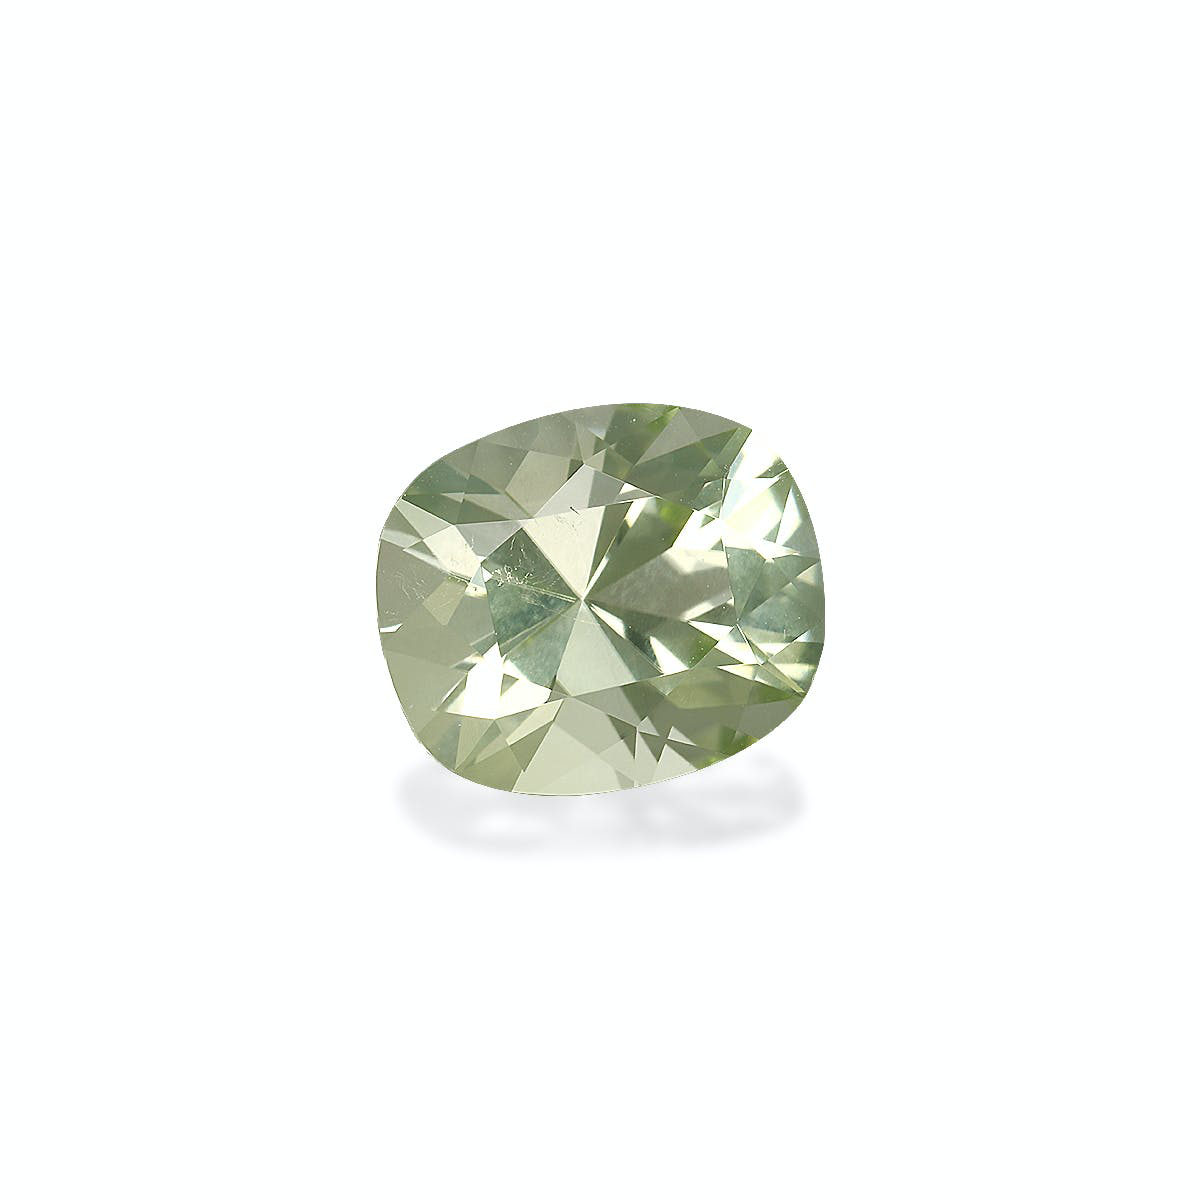 Picture of Mist Green Tourmaline 6.45ct - 13x11mm (TG1087)